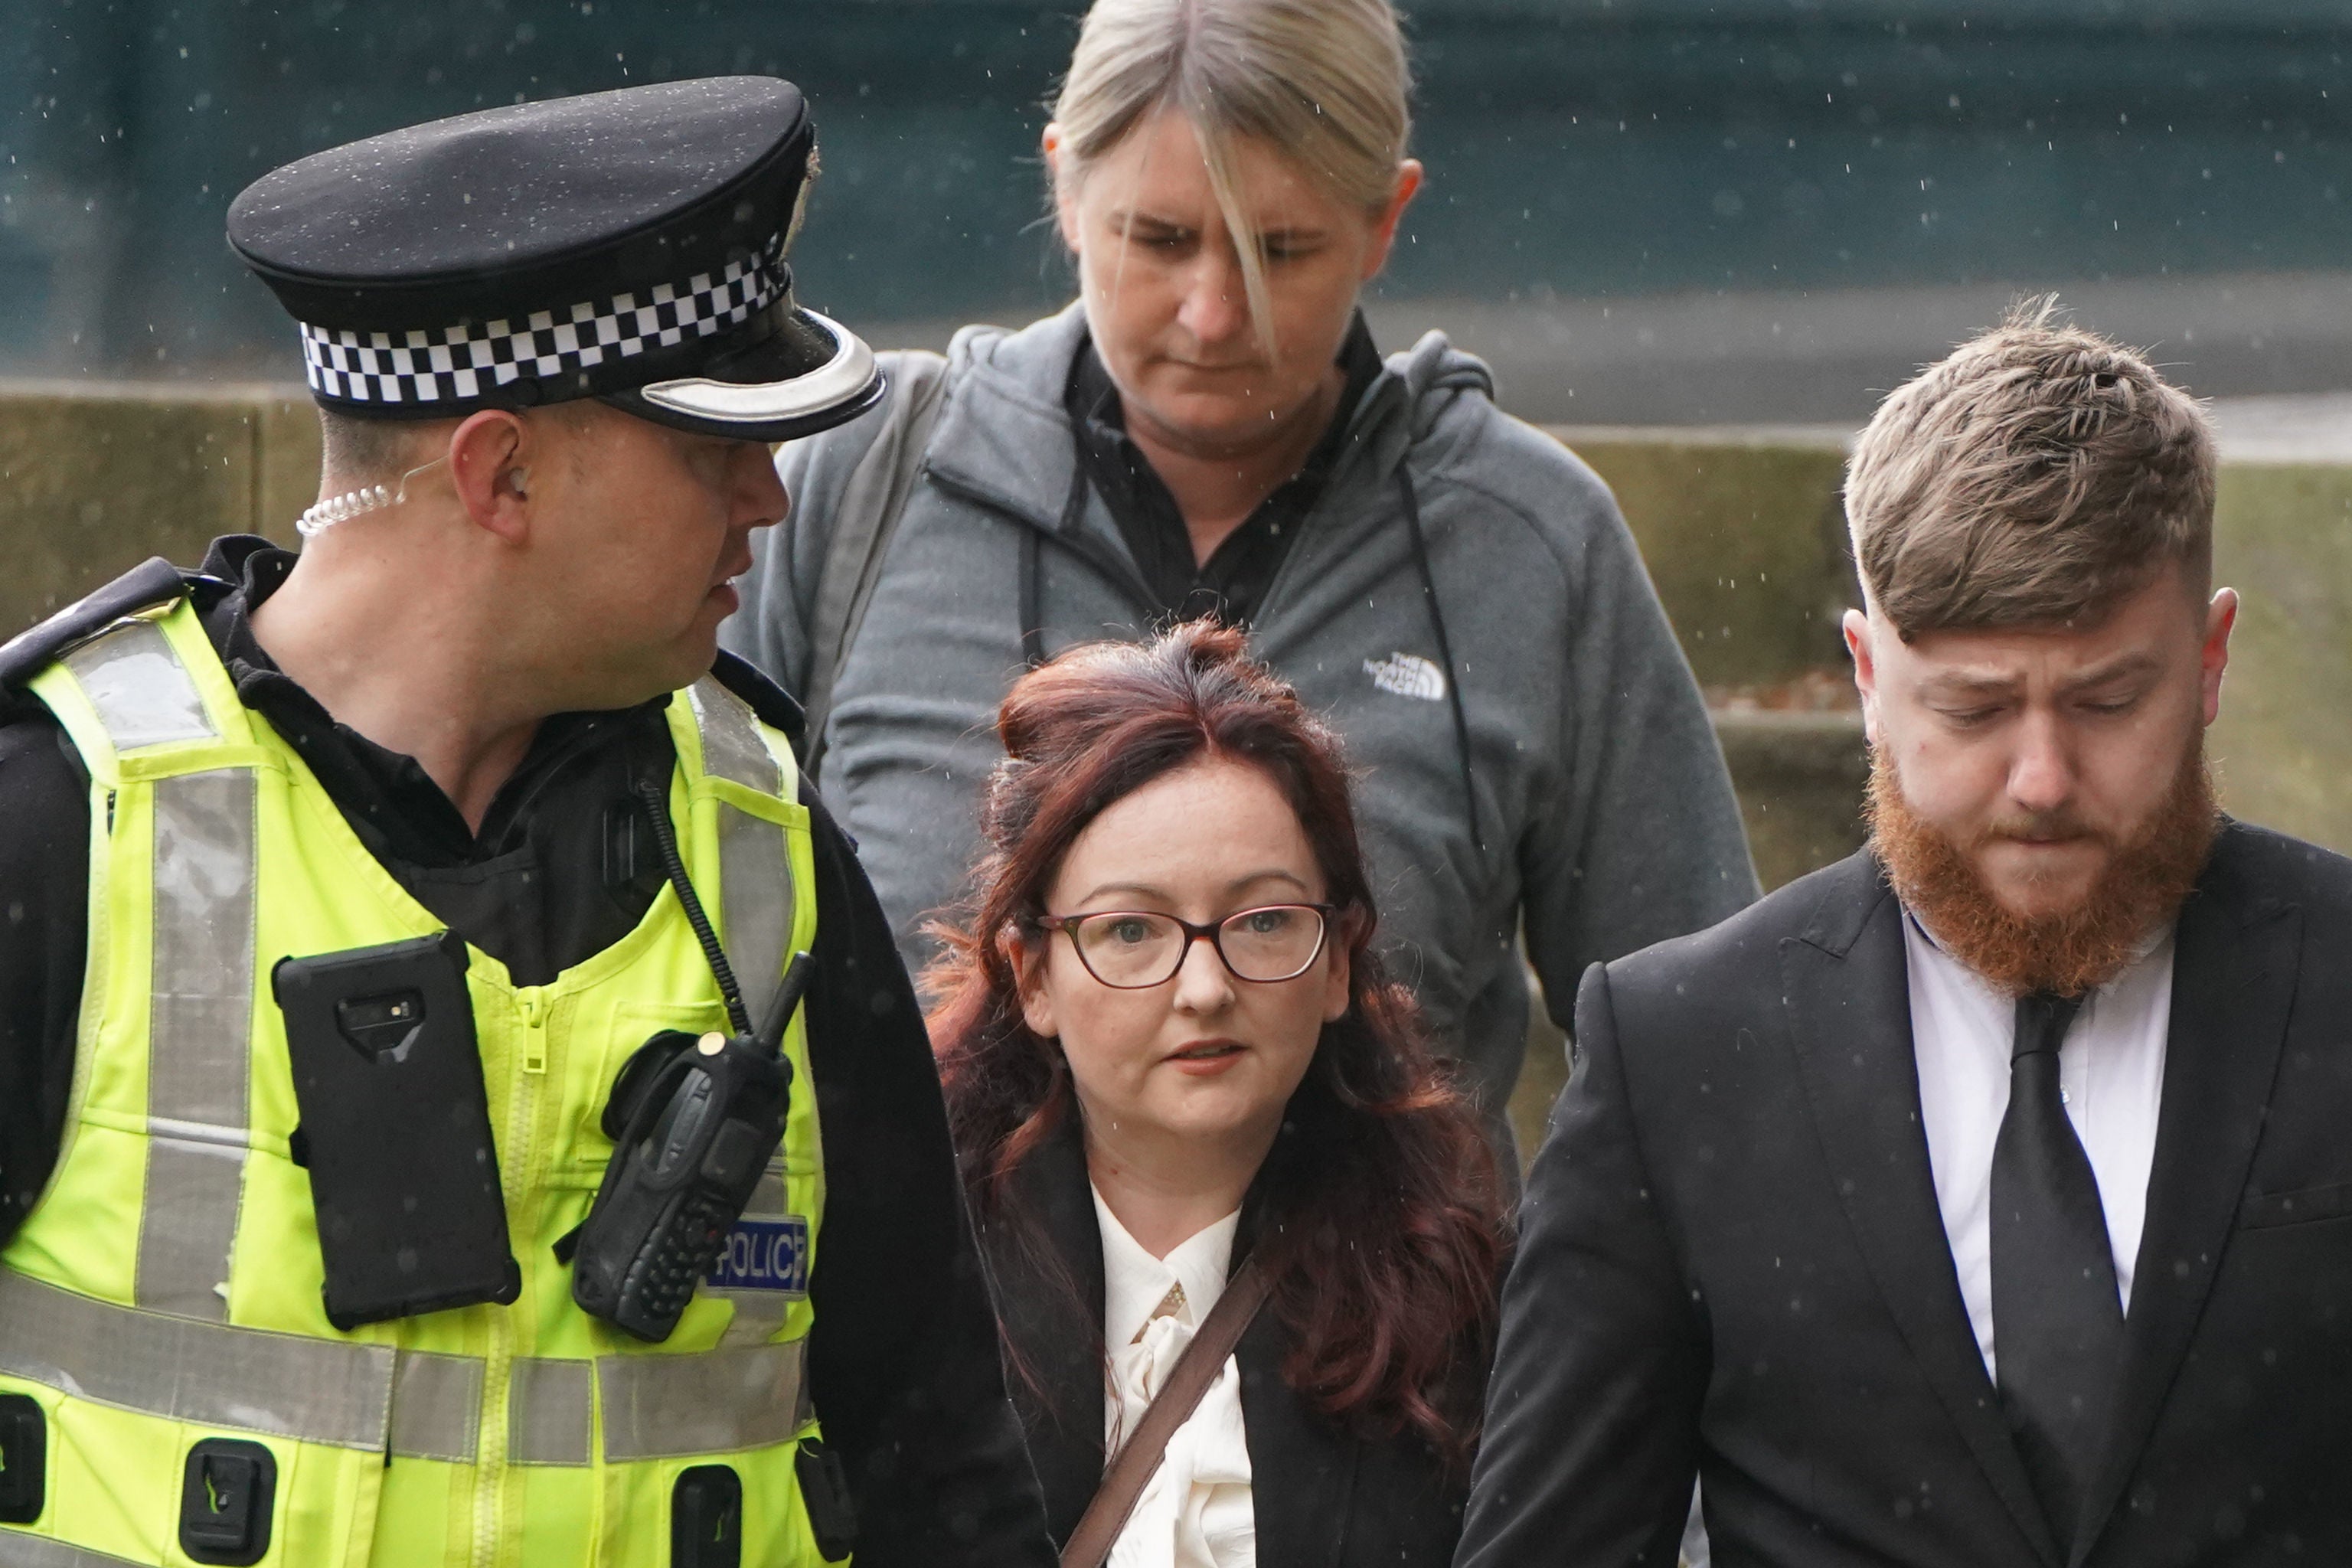 Former PC Nicole Short (front, centre) arrives at Capital House in Edinburgh for the public inquiry into Sheku Bayoh’s death (Andrew Milligan/PA)